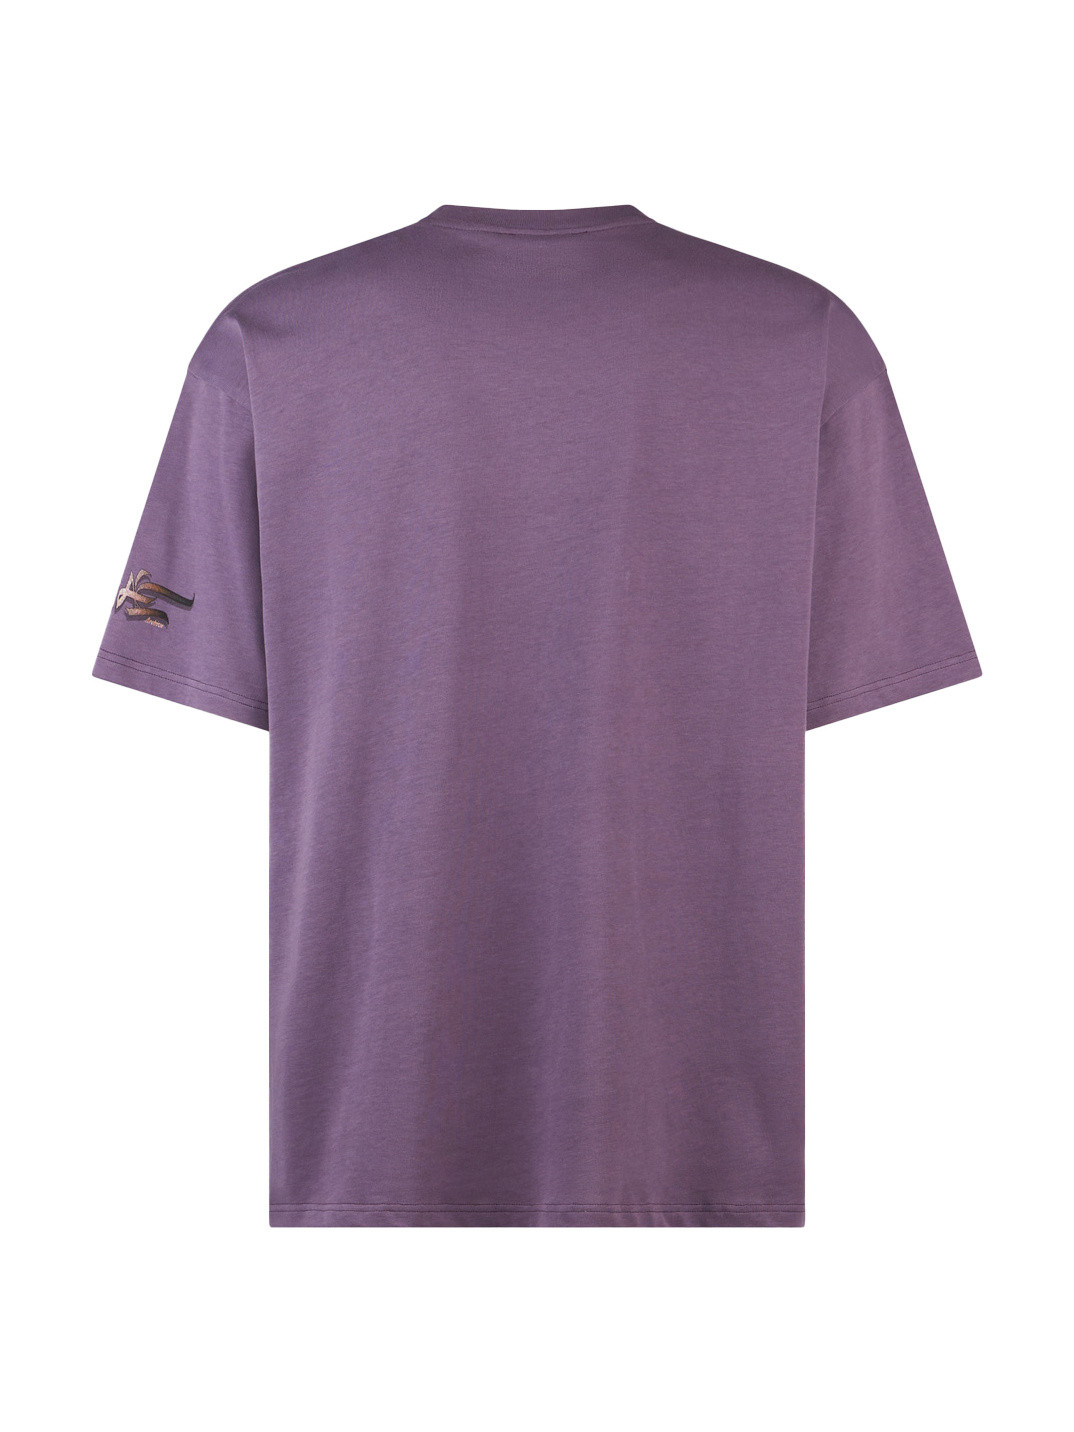 Phobia - Cotton T-shirt with shark print, Purple, large image number 1